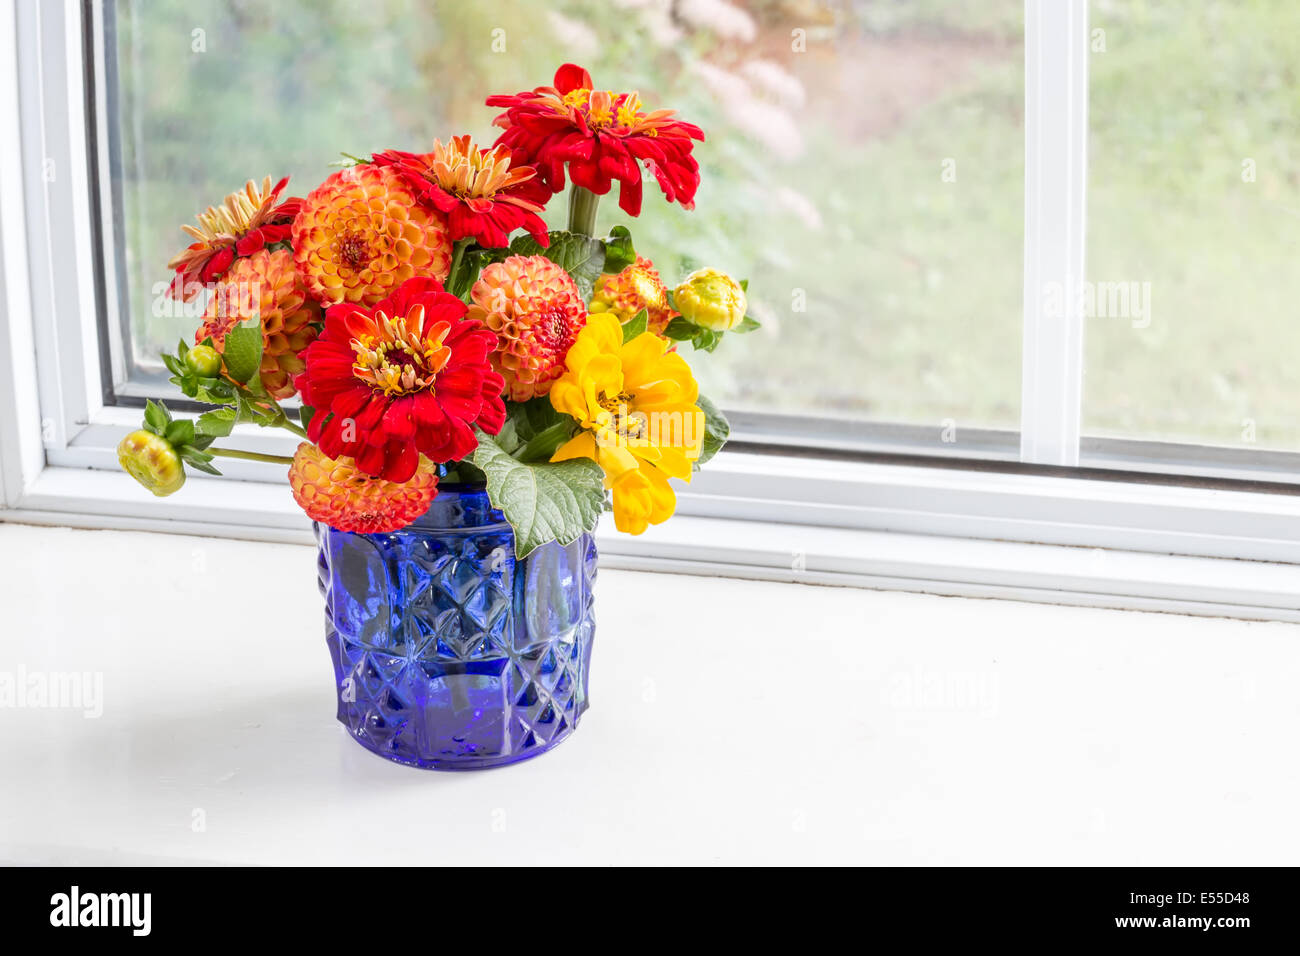 Home style fall bouquet with garden flowers. Stock Photo